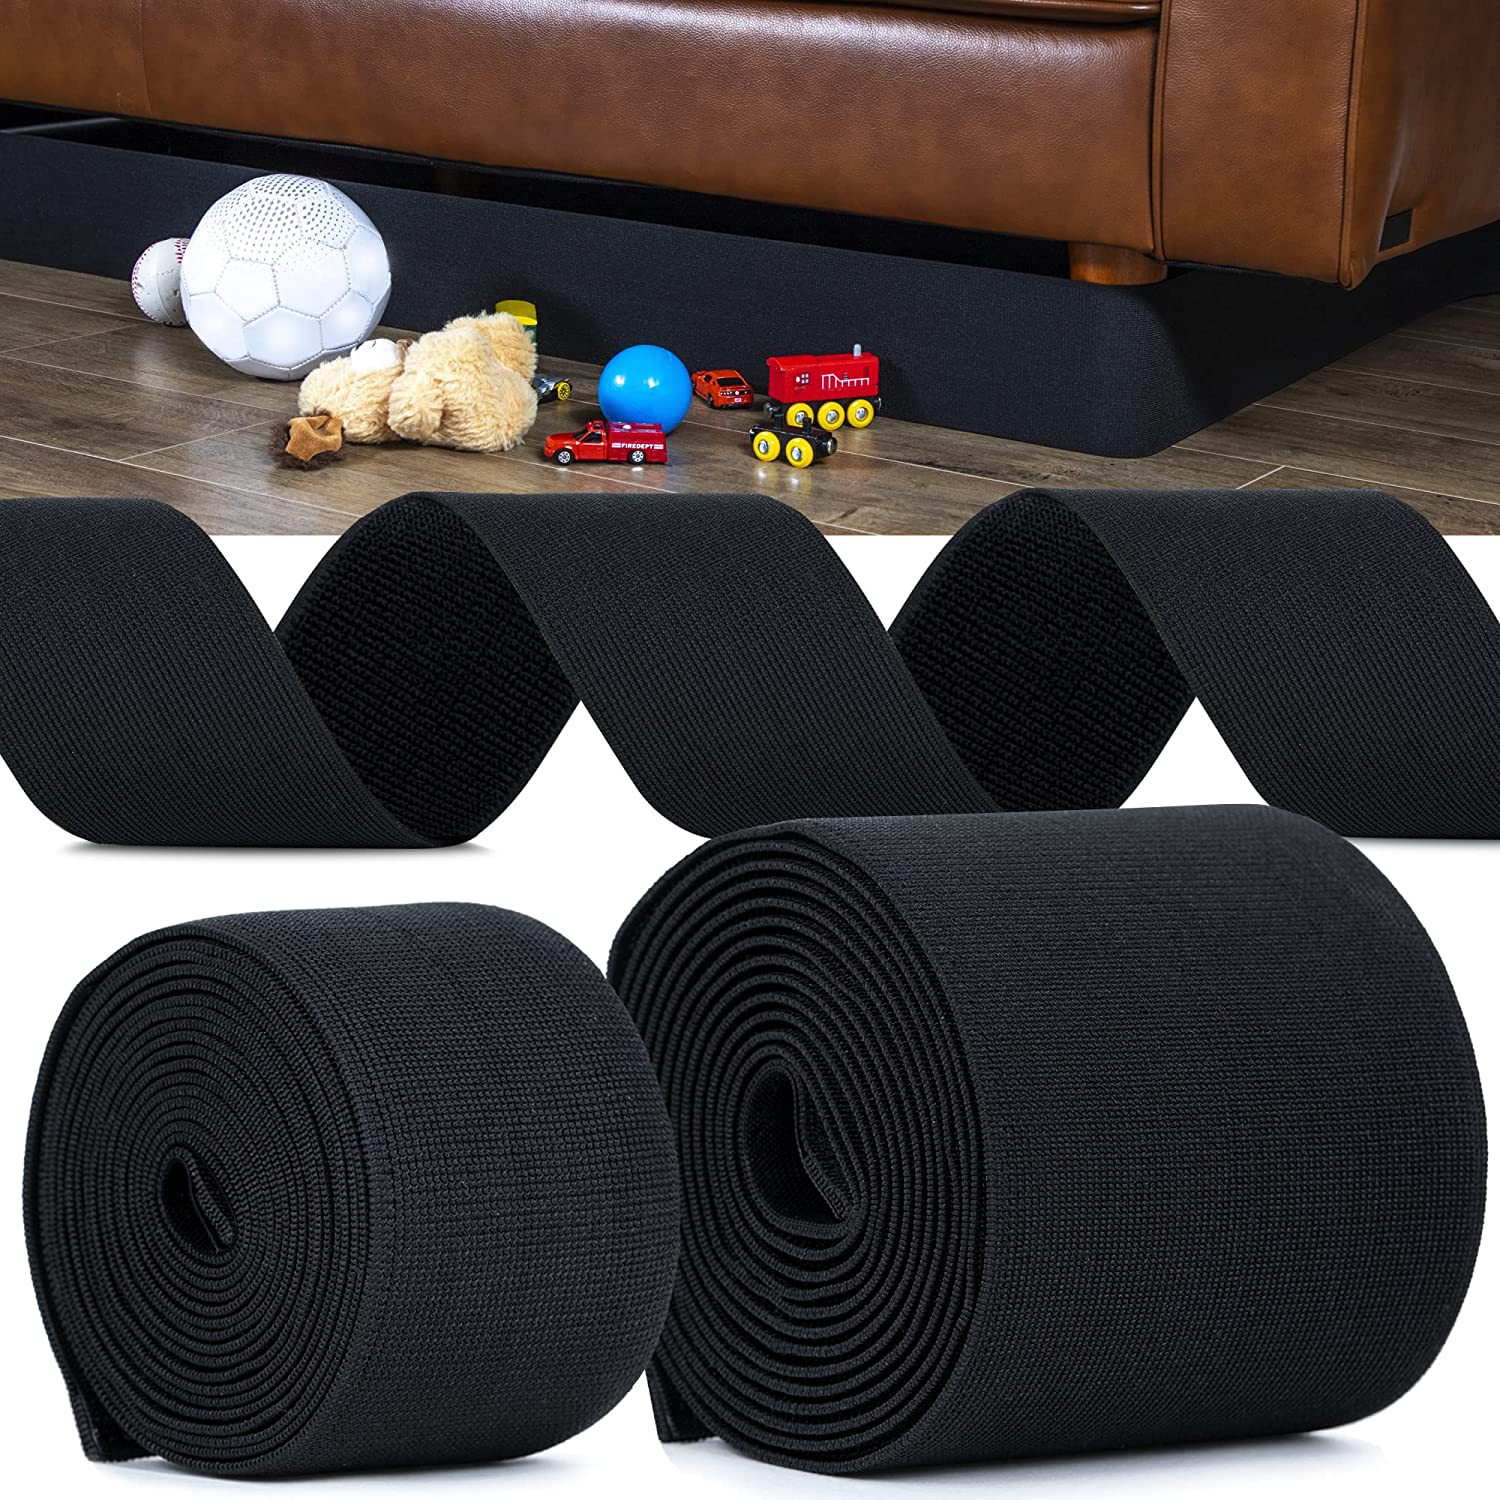 Toy Blocker for Under Couch, 4 Packs 19.7 Feet Under Couch Blockers Straps  for Toys (4 Rolls 78.8 Feet in Total), Under Sofa Gap Bumper Adjustable Toy  Stoppers Belt, Include 4 Adhesive Mounting Straps Black